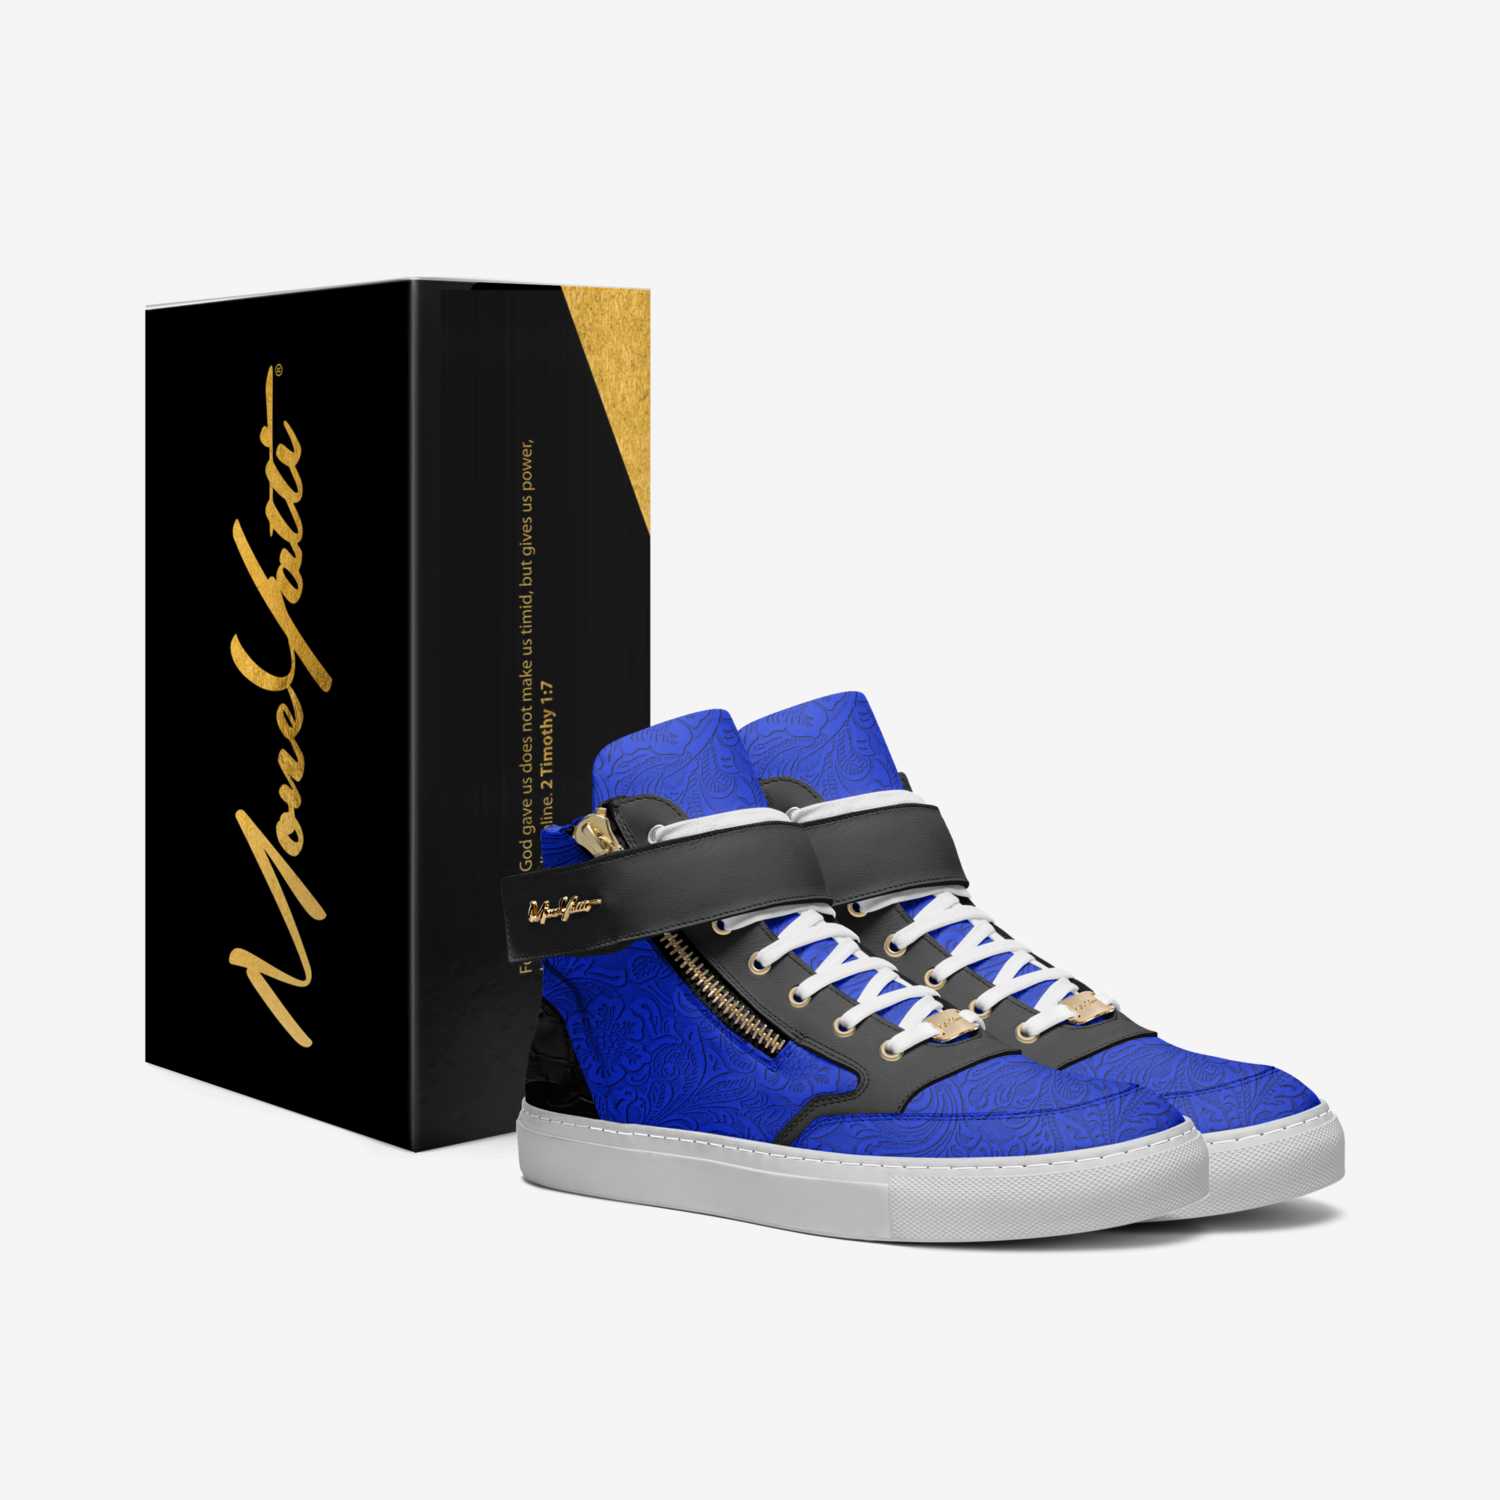 Masterpiece 021 custom made in Italy shoes by Moneyatti Brand | Box view